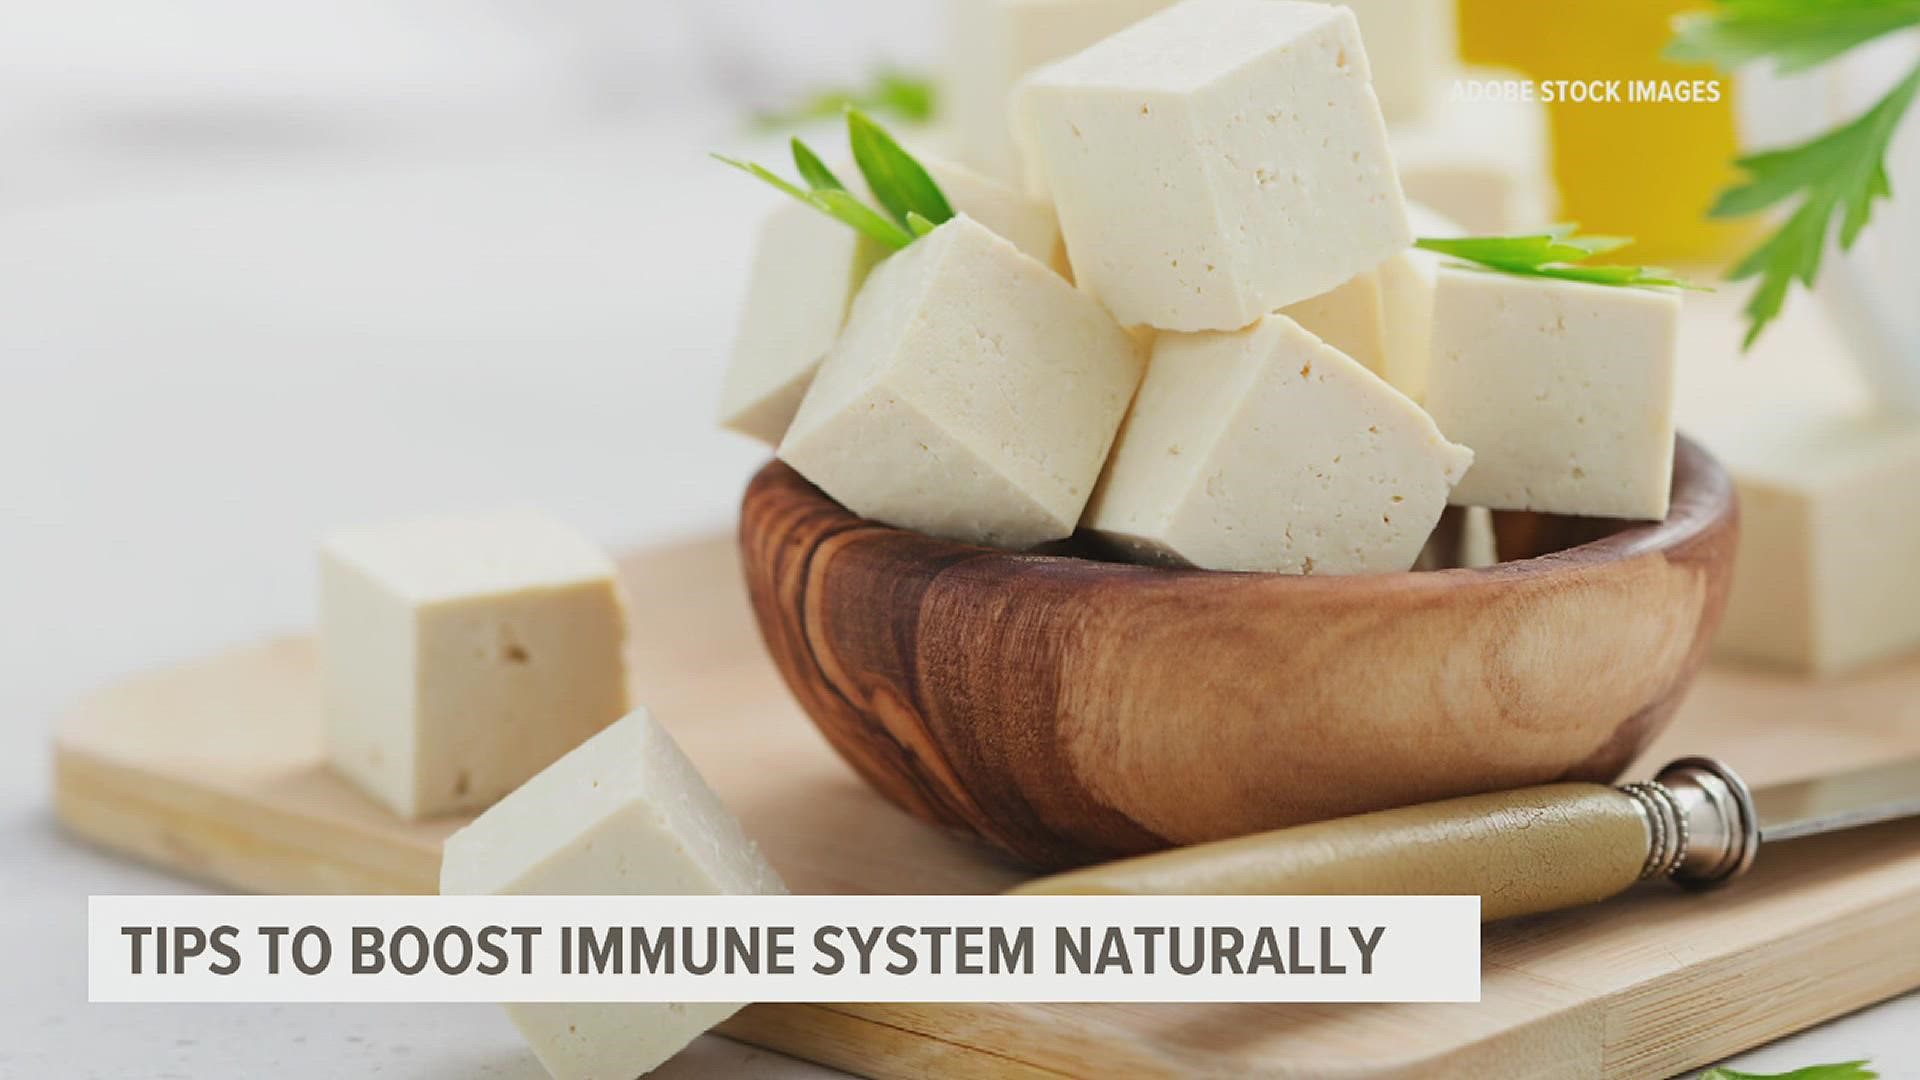 A healthy immune system can make all the difference in how your body fights off illnesses.